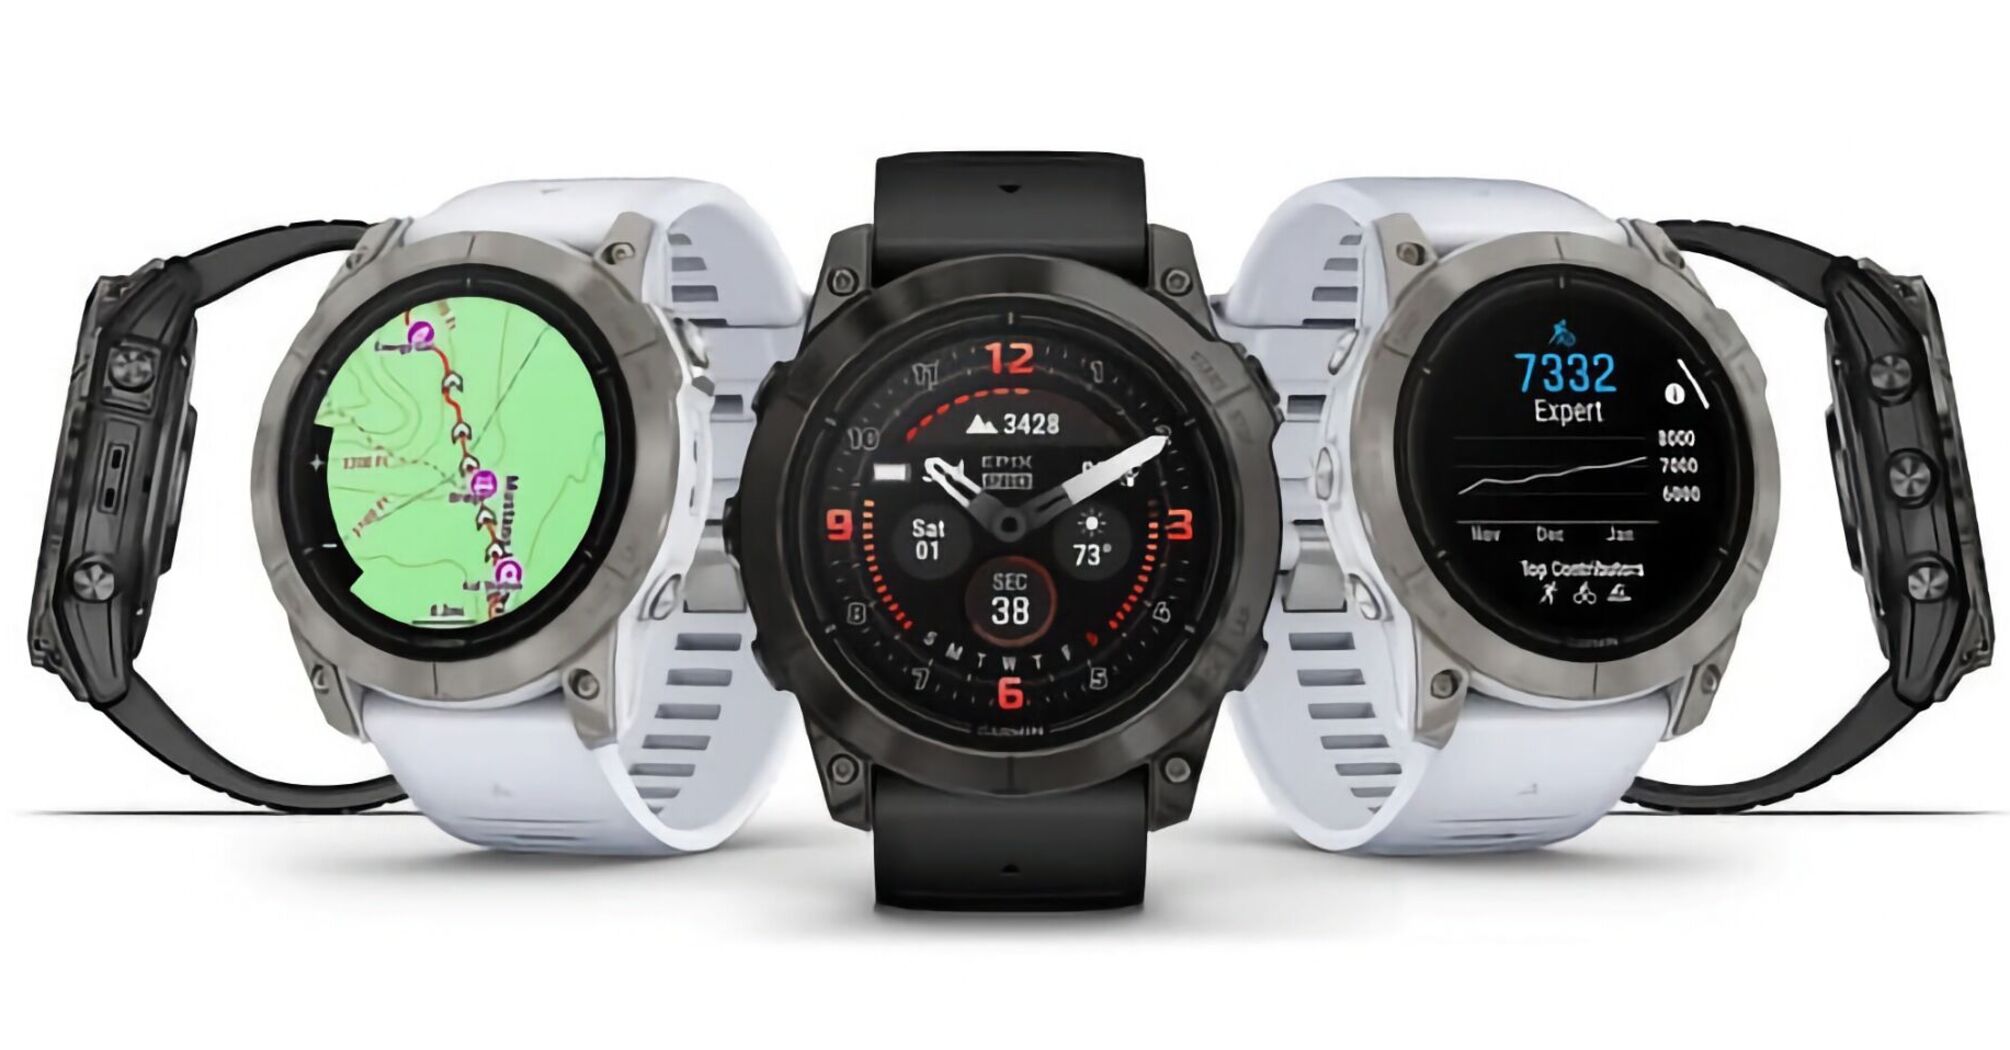 Garmin has launched firmware updates for 11 watch models